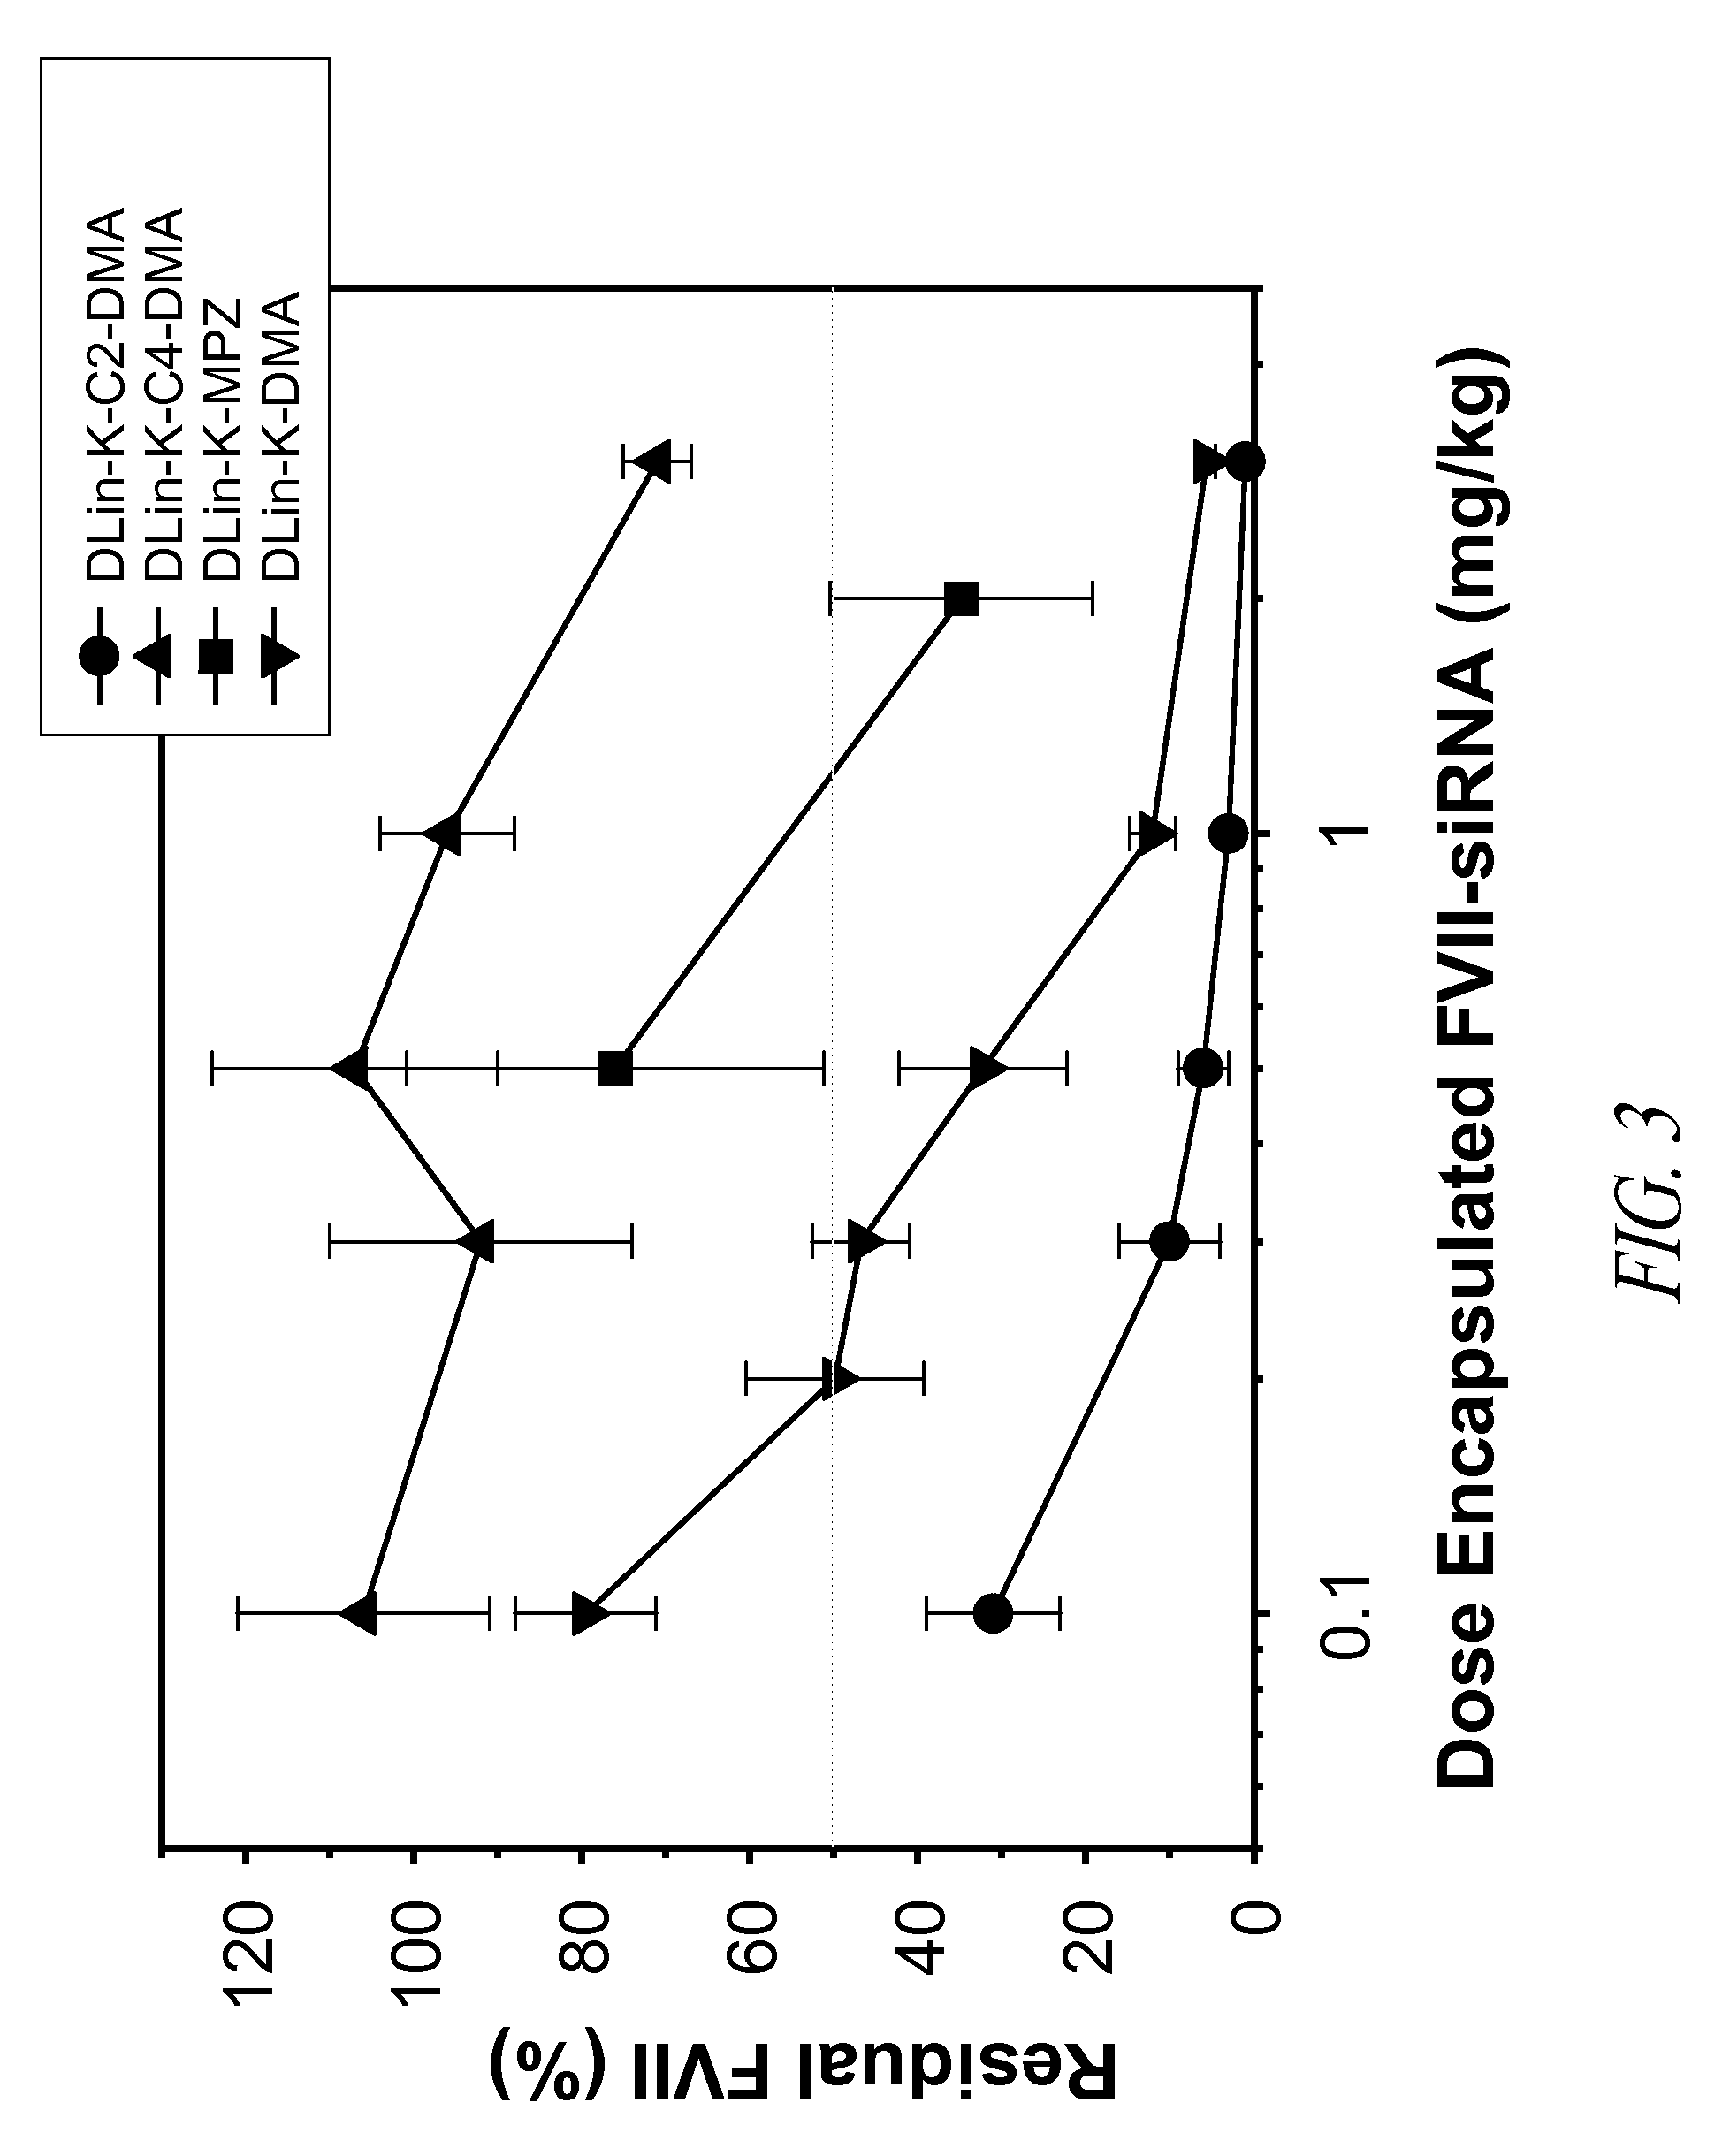 Amino lipids and methods for the delivery of nucleic acids